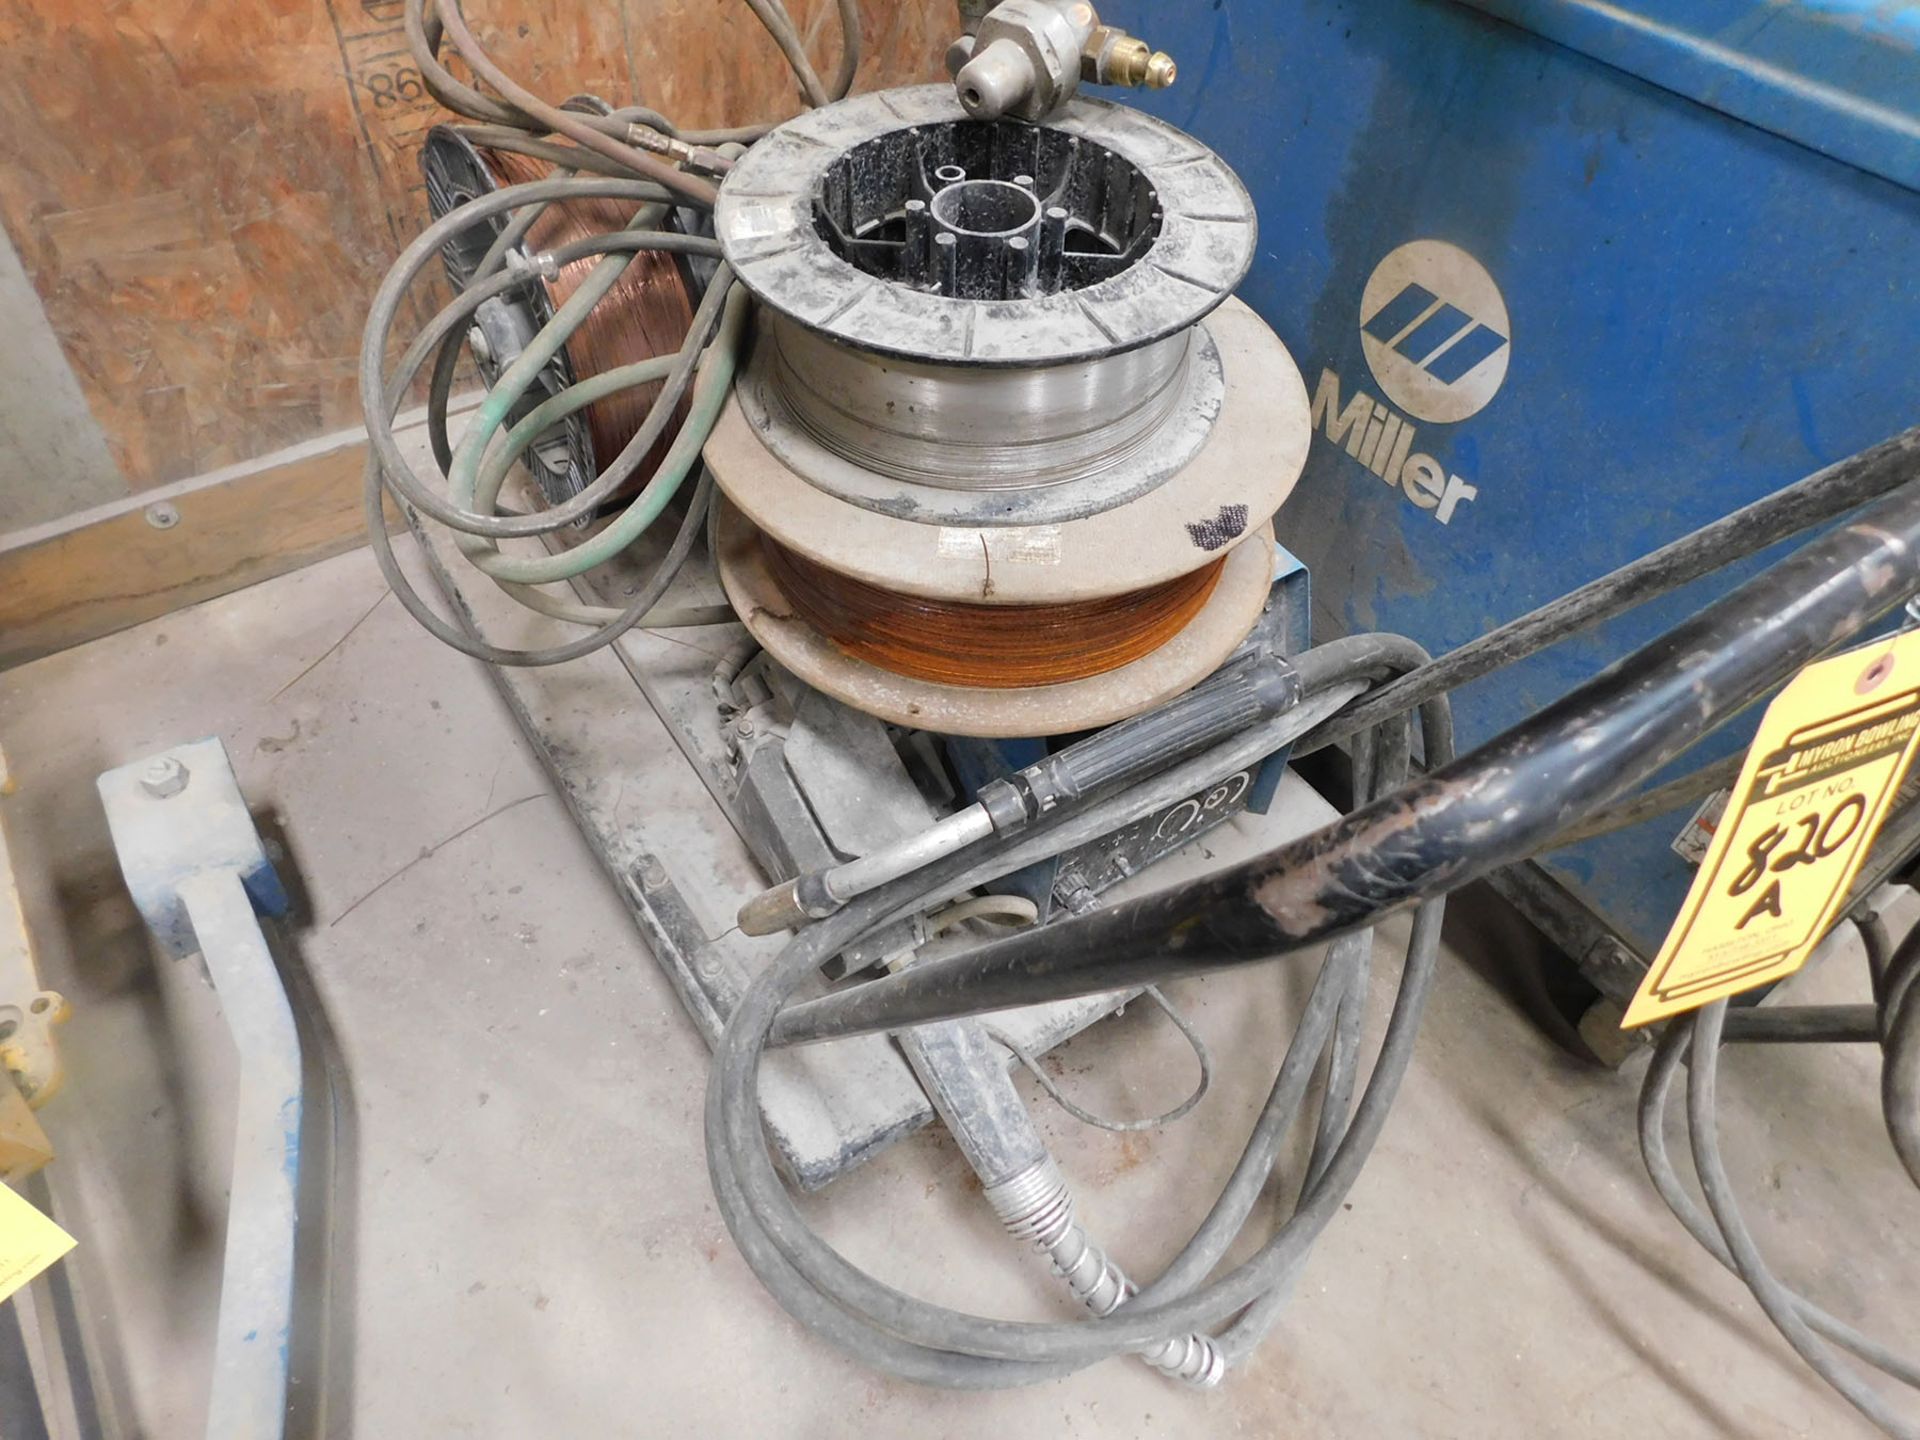 MILLER WIRE FEEDER ON ROLLING CART WITH WIRE